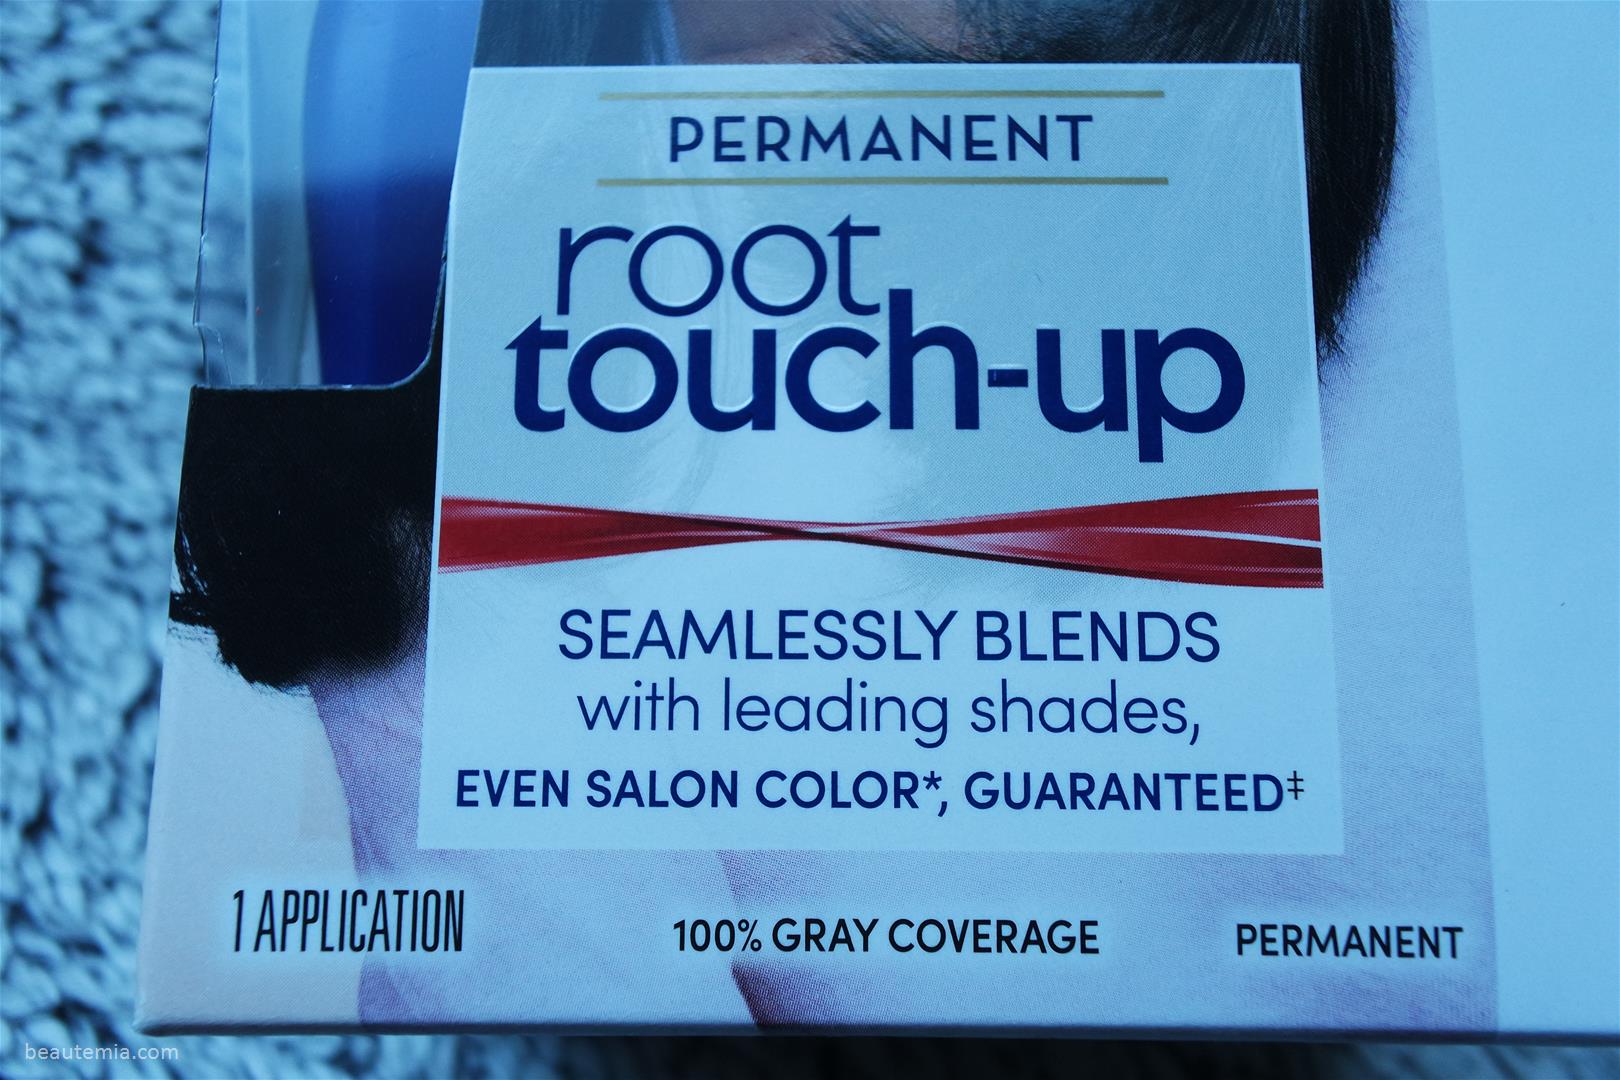 Clairol Permanent Root Touch-up for Gray hair, best self hair dye for black brown hair, asian hair, L'Oreal hair color dye, henna gray silver hair color & root touch up